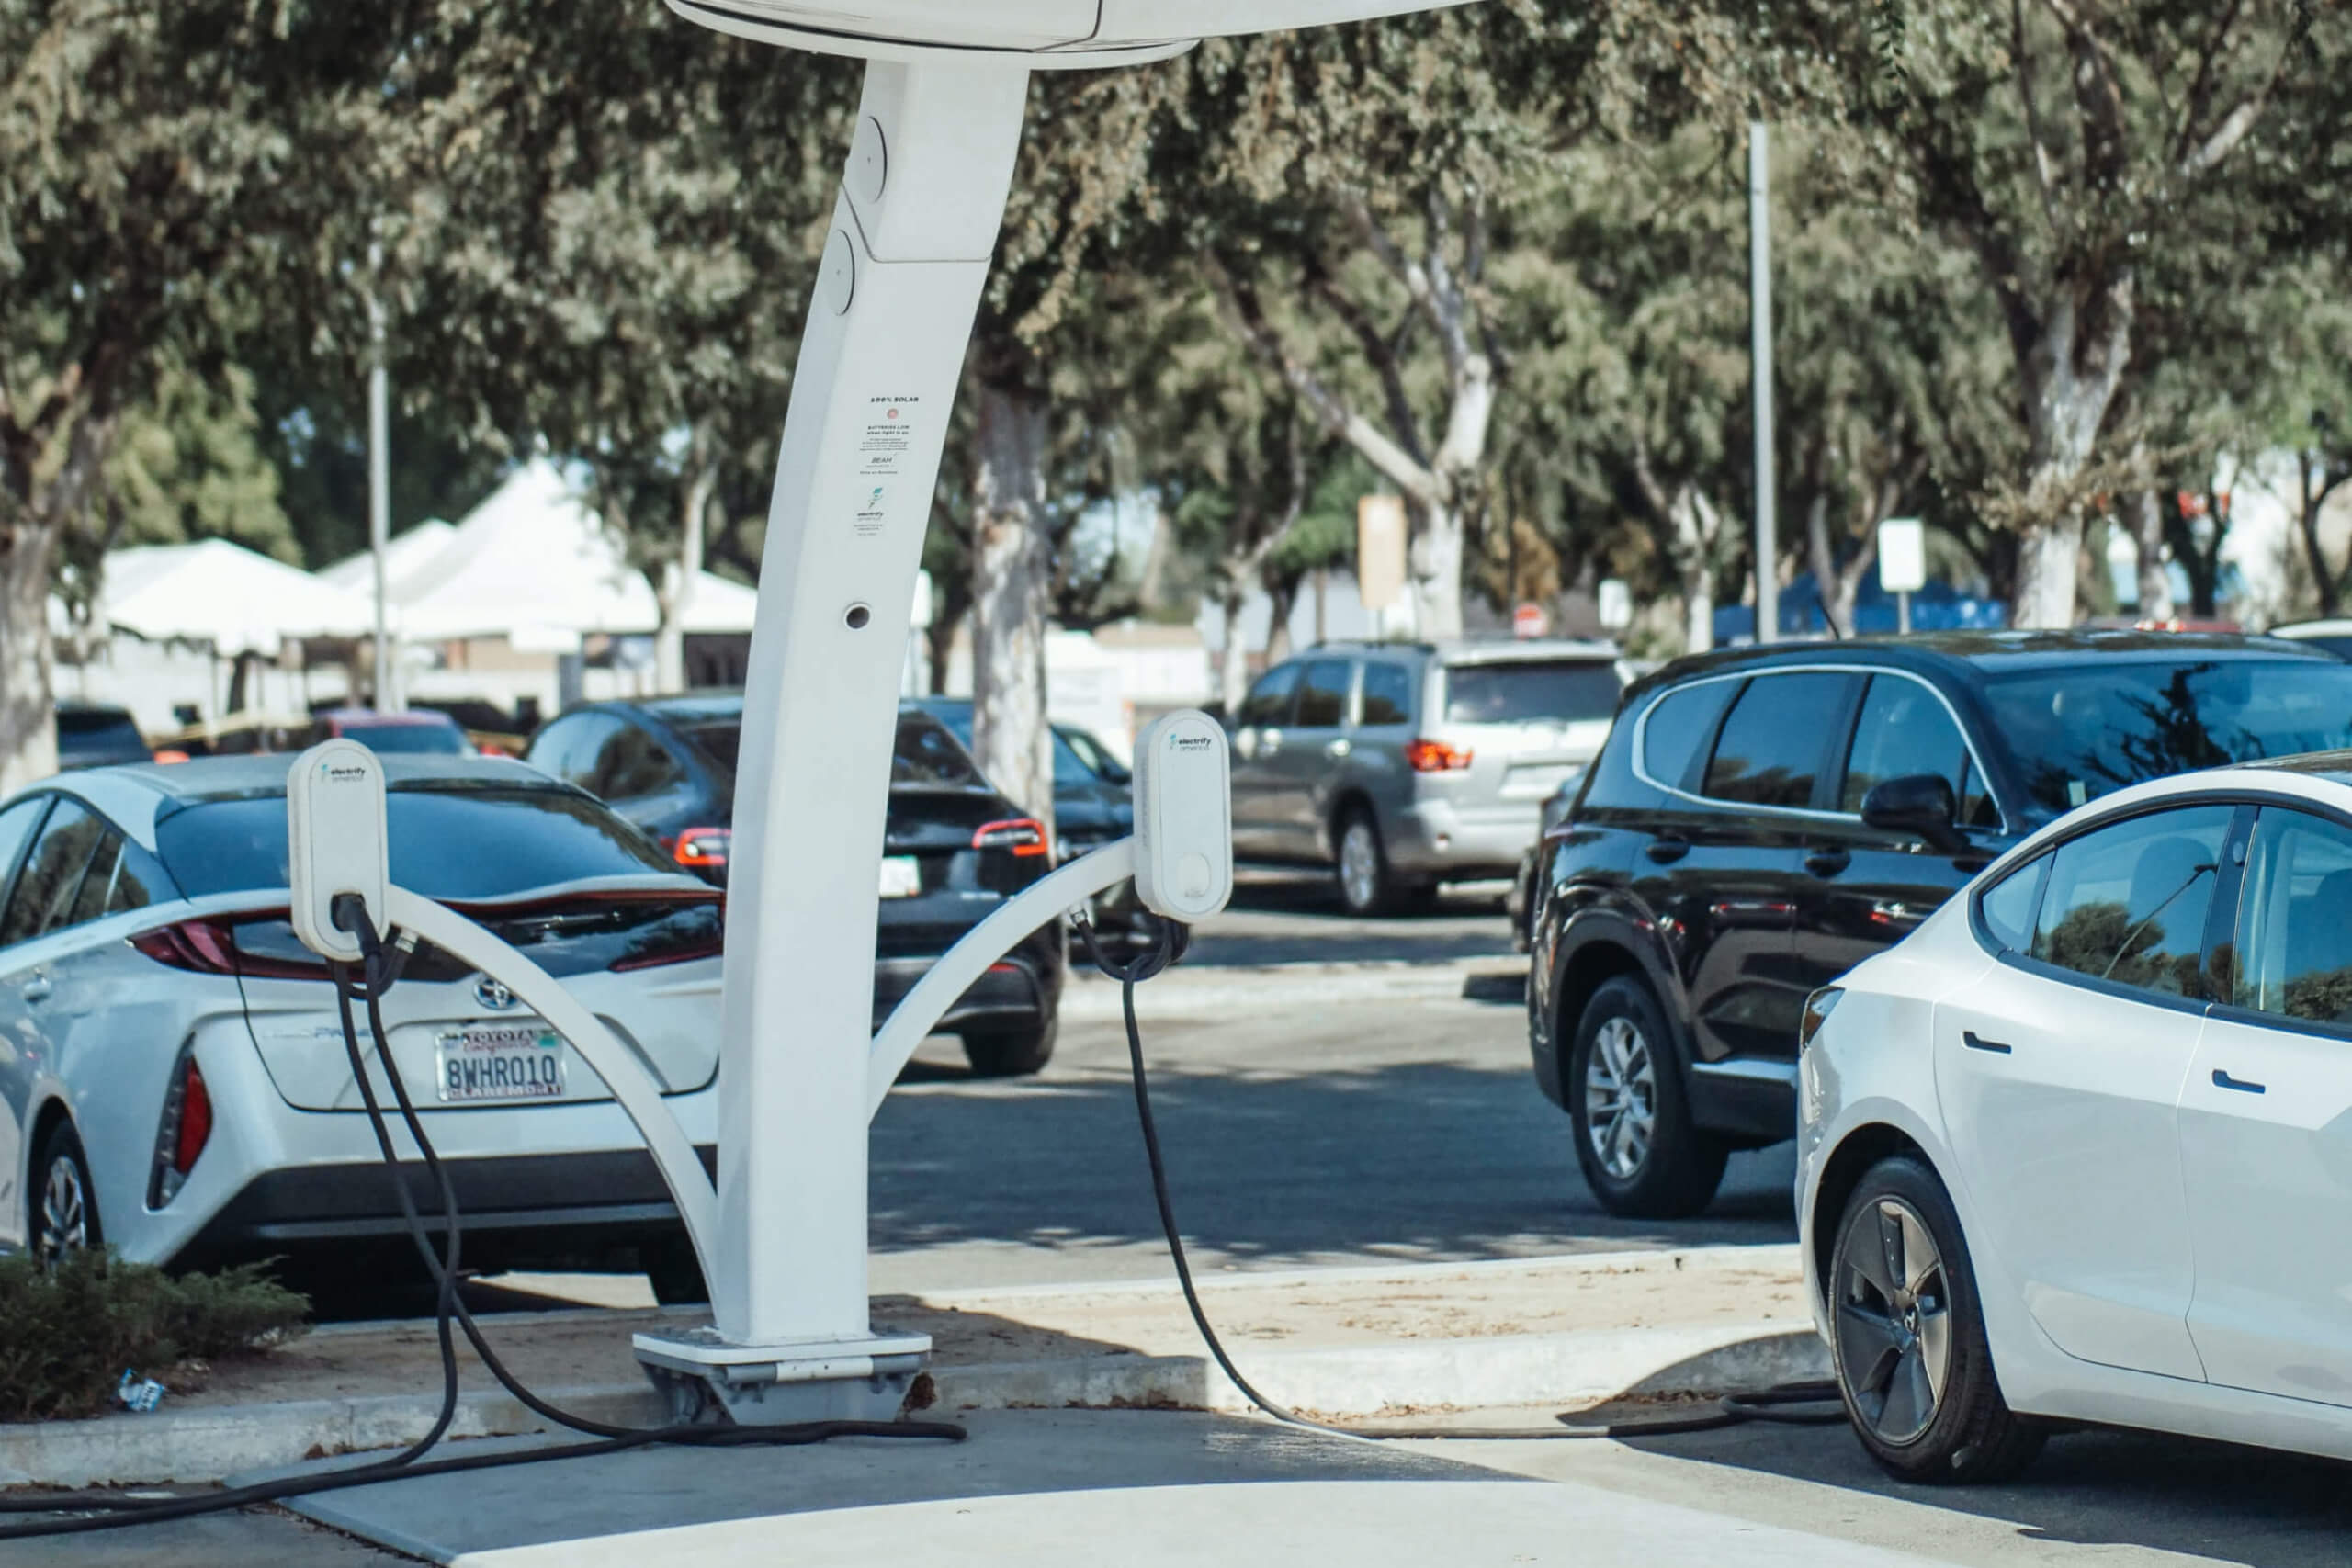 Polyurethane can be used for street furniture like EV charge stations